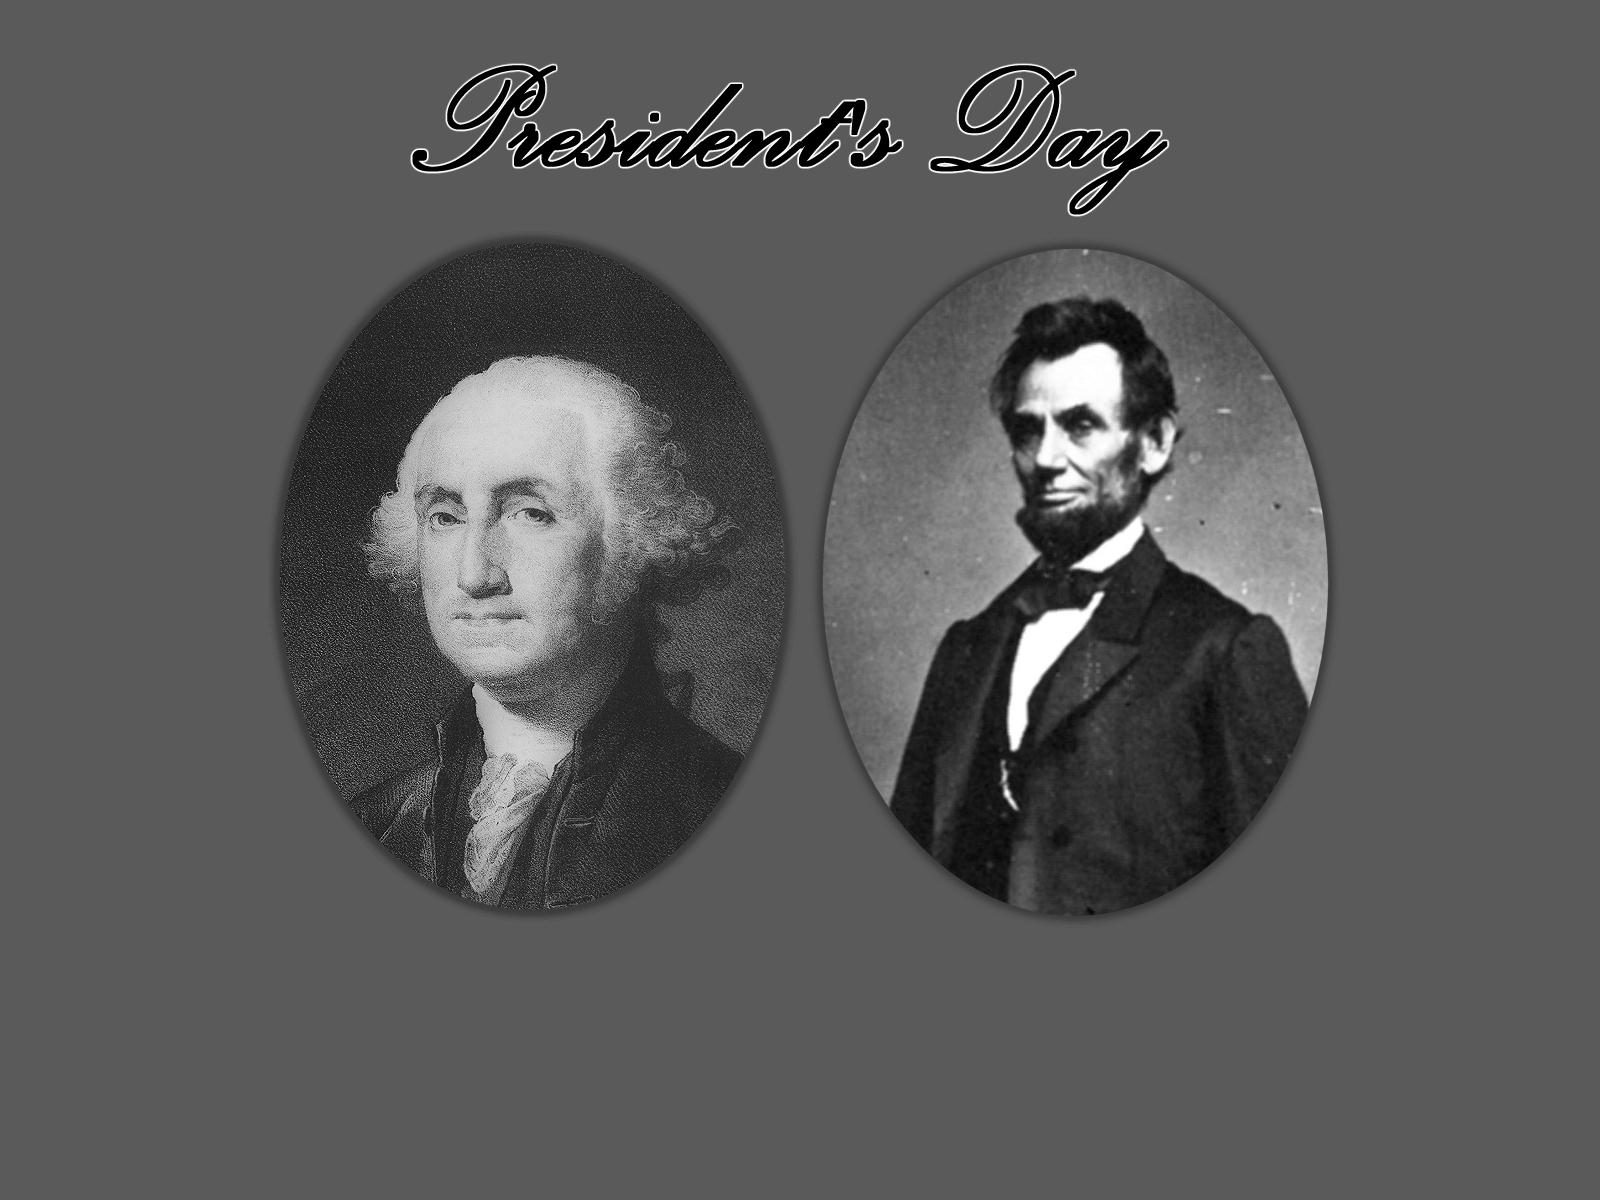 President S Day Wallpaper Background Image For Your Desktop With